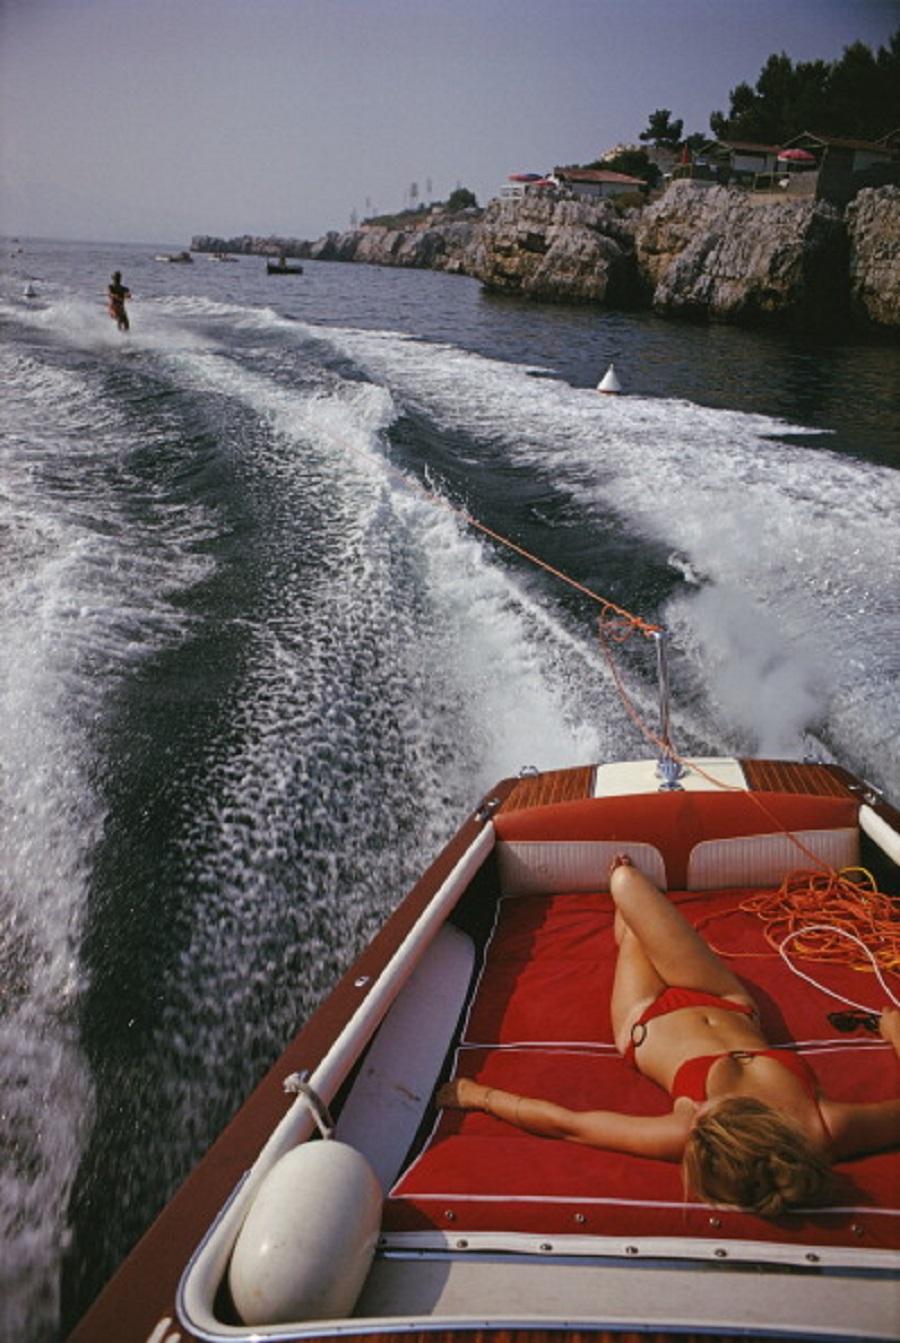 'Leisure In Antibes' 1969 Slim Aarons Limited Estate Edition Print 

A woman sunbathing in a motorboat as it tows a water skier, in the sea off the Hotel du Cap-Eden-Roc in Antibes on the French Riviera, August 1969. 

Produced from the original